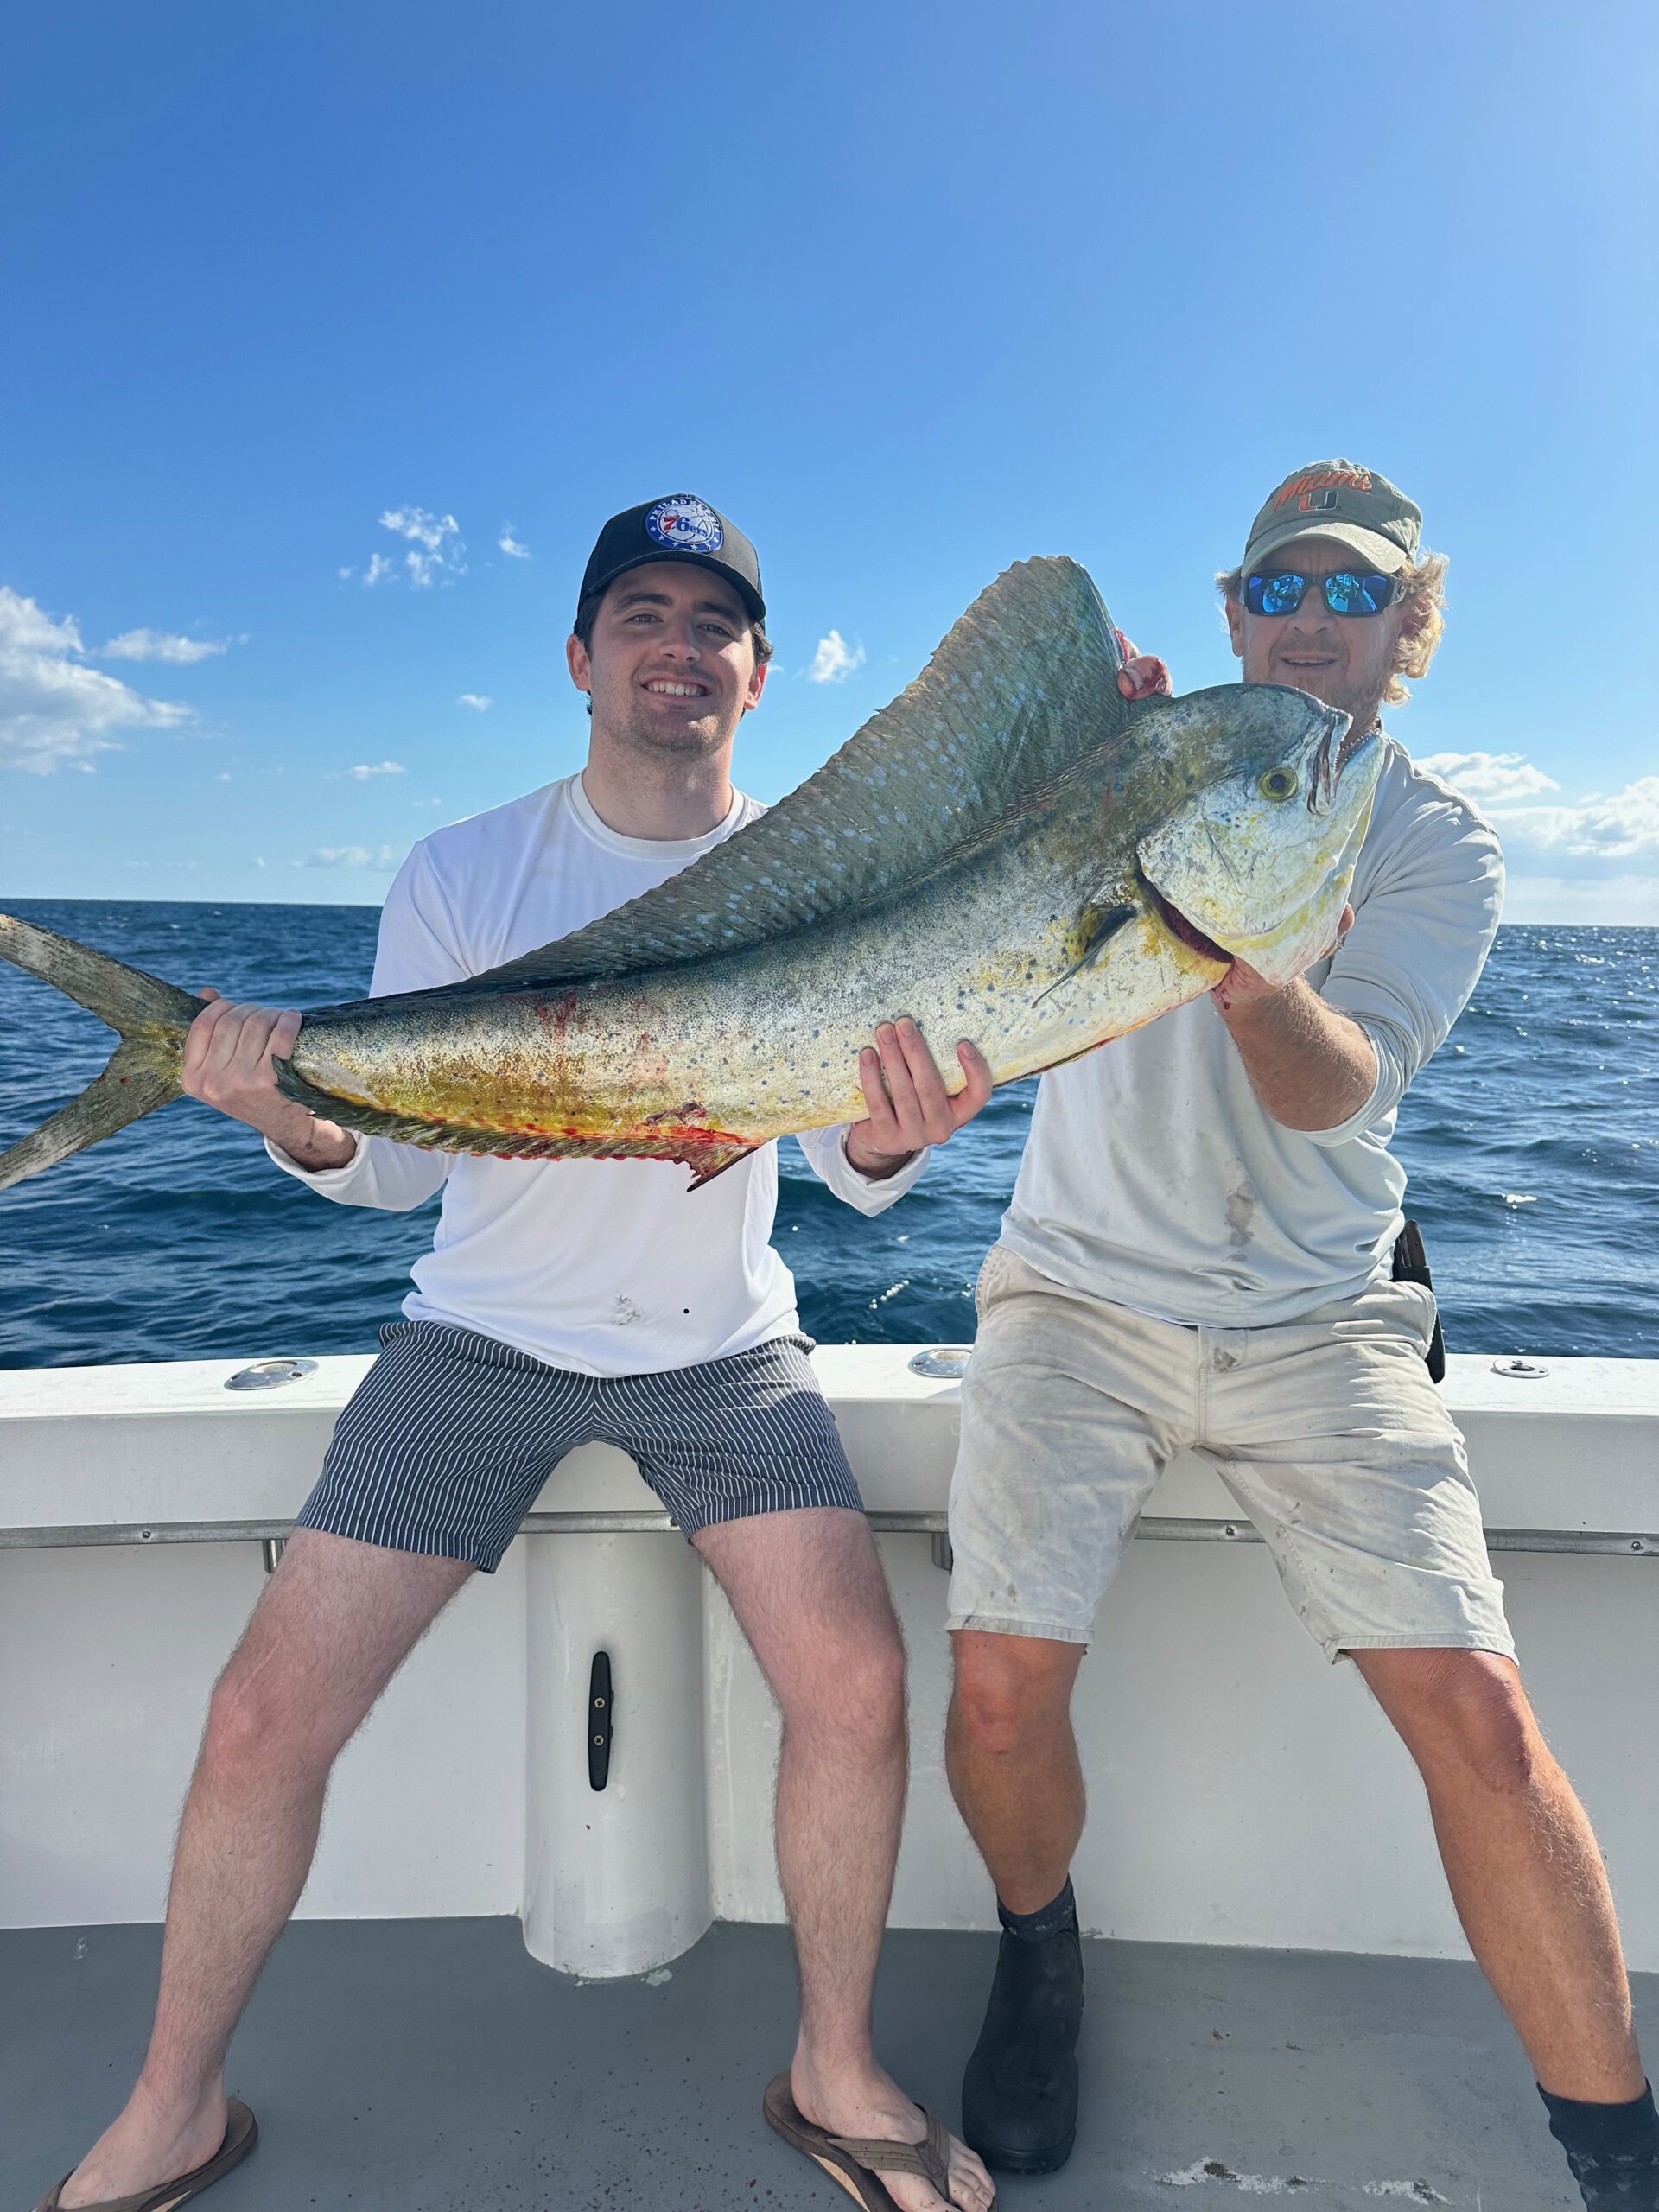 Spring Fishing Is HOT In Fort Lauderdale